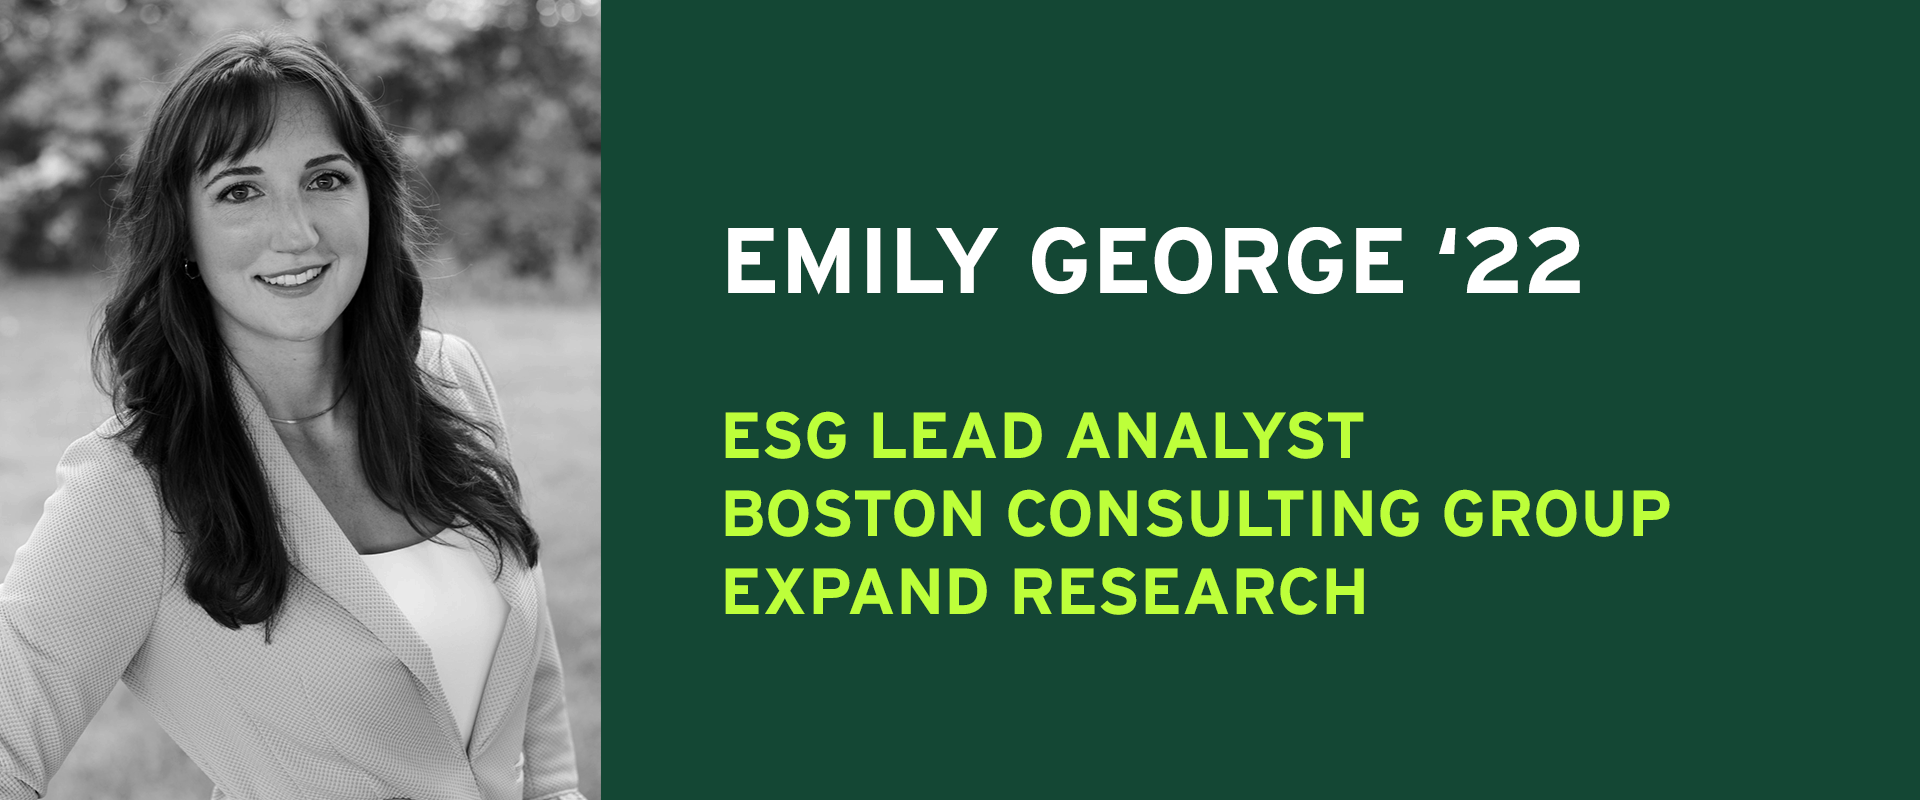 Emily George ESG Lead Analyst Boston Consulting Group Expand Research